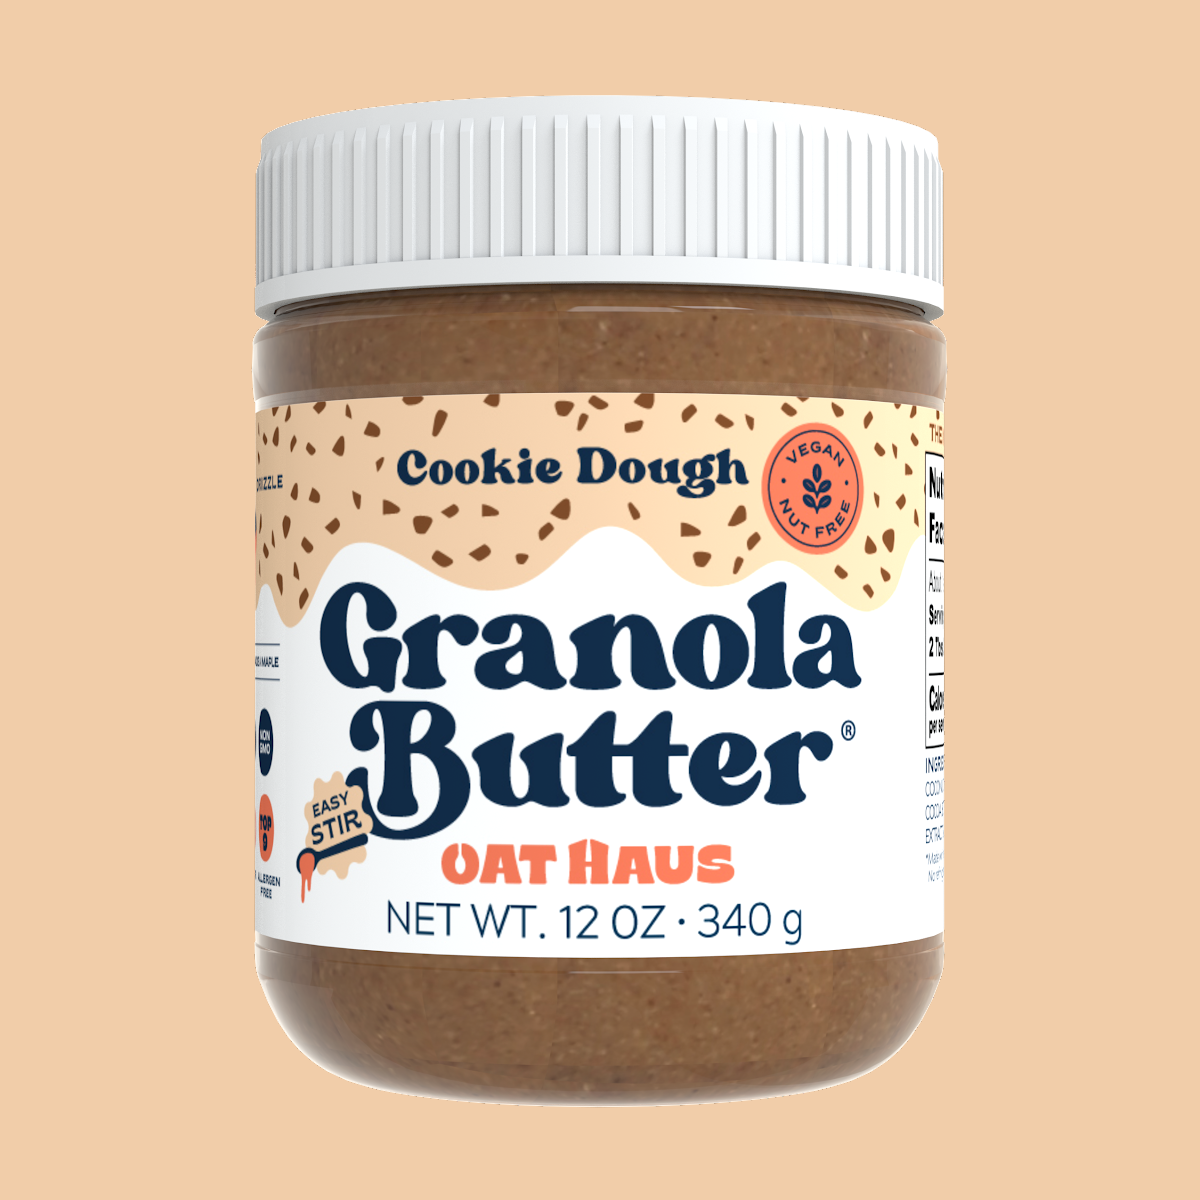 EASY STIR Cookie Dough (+Chips) Granola Butter